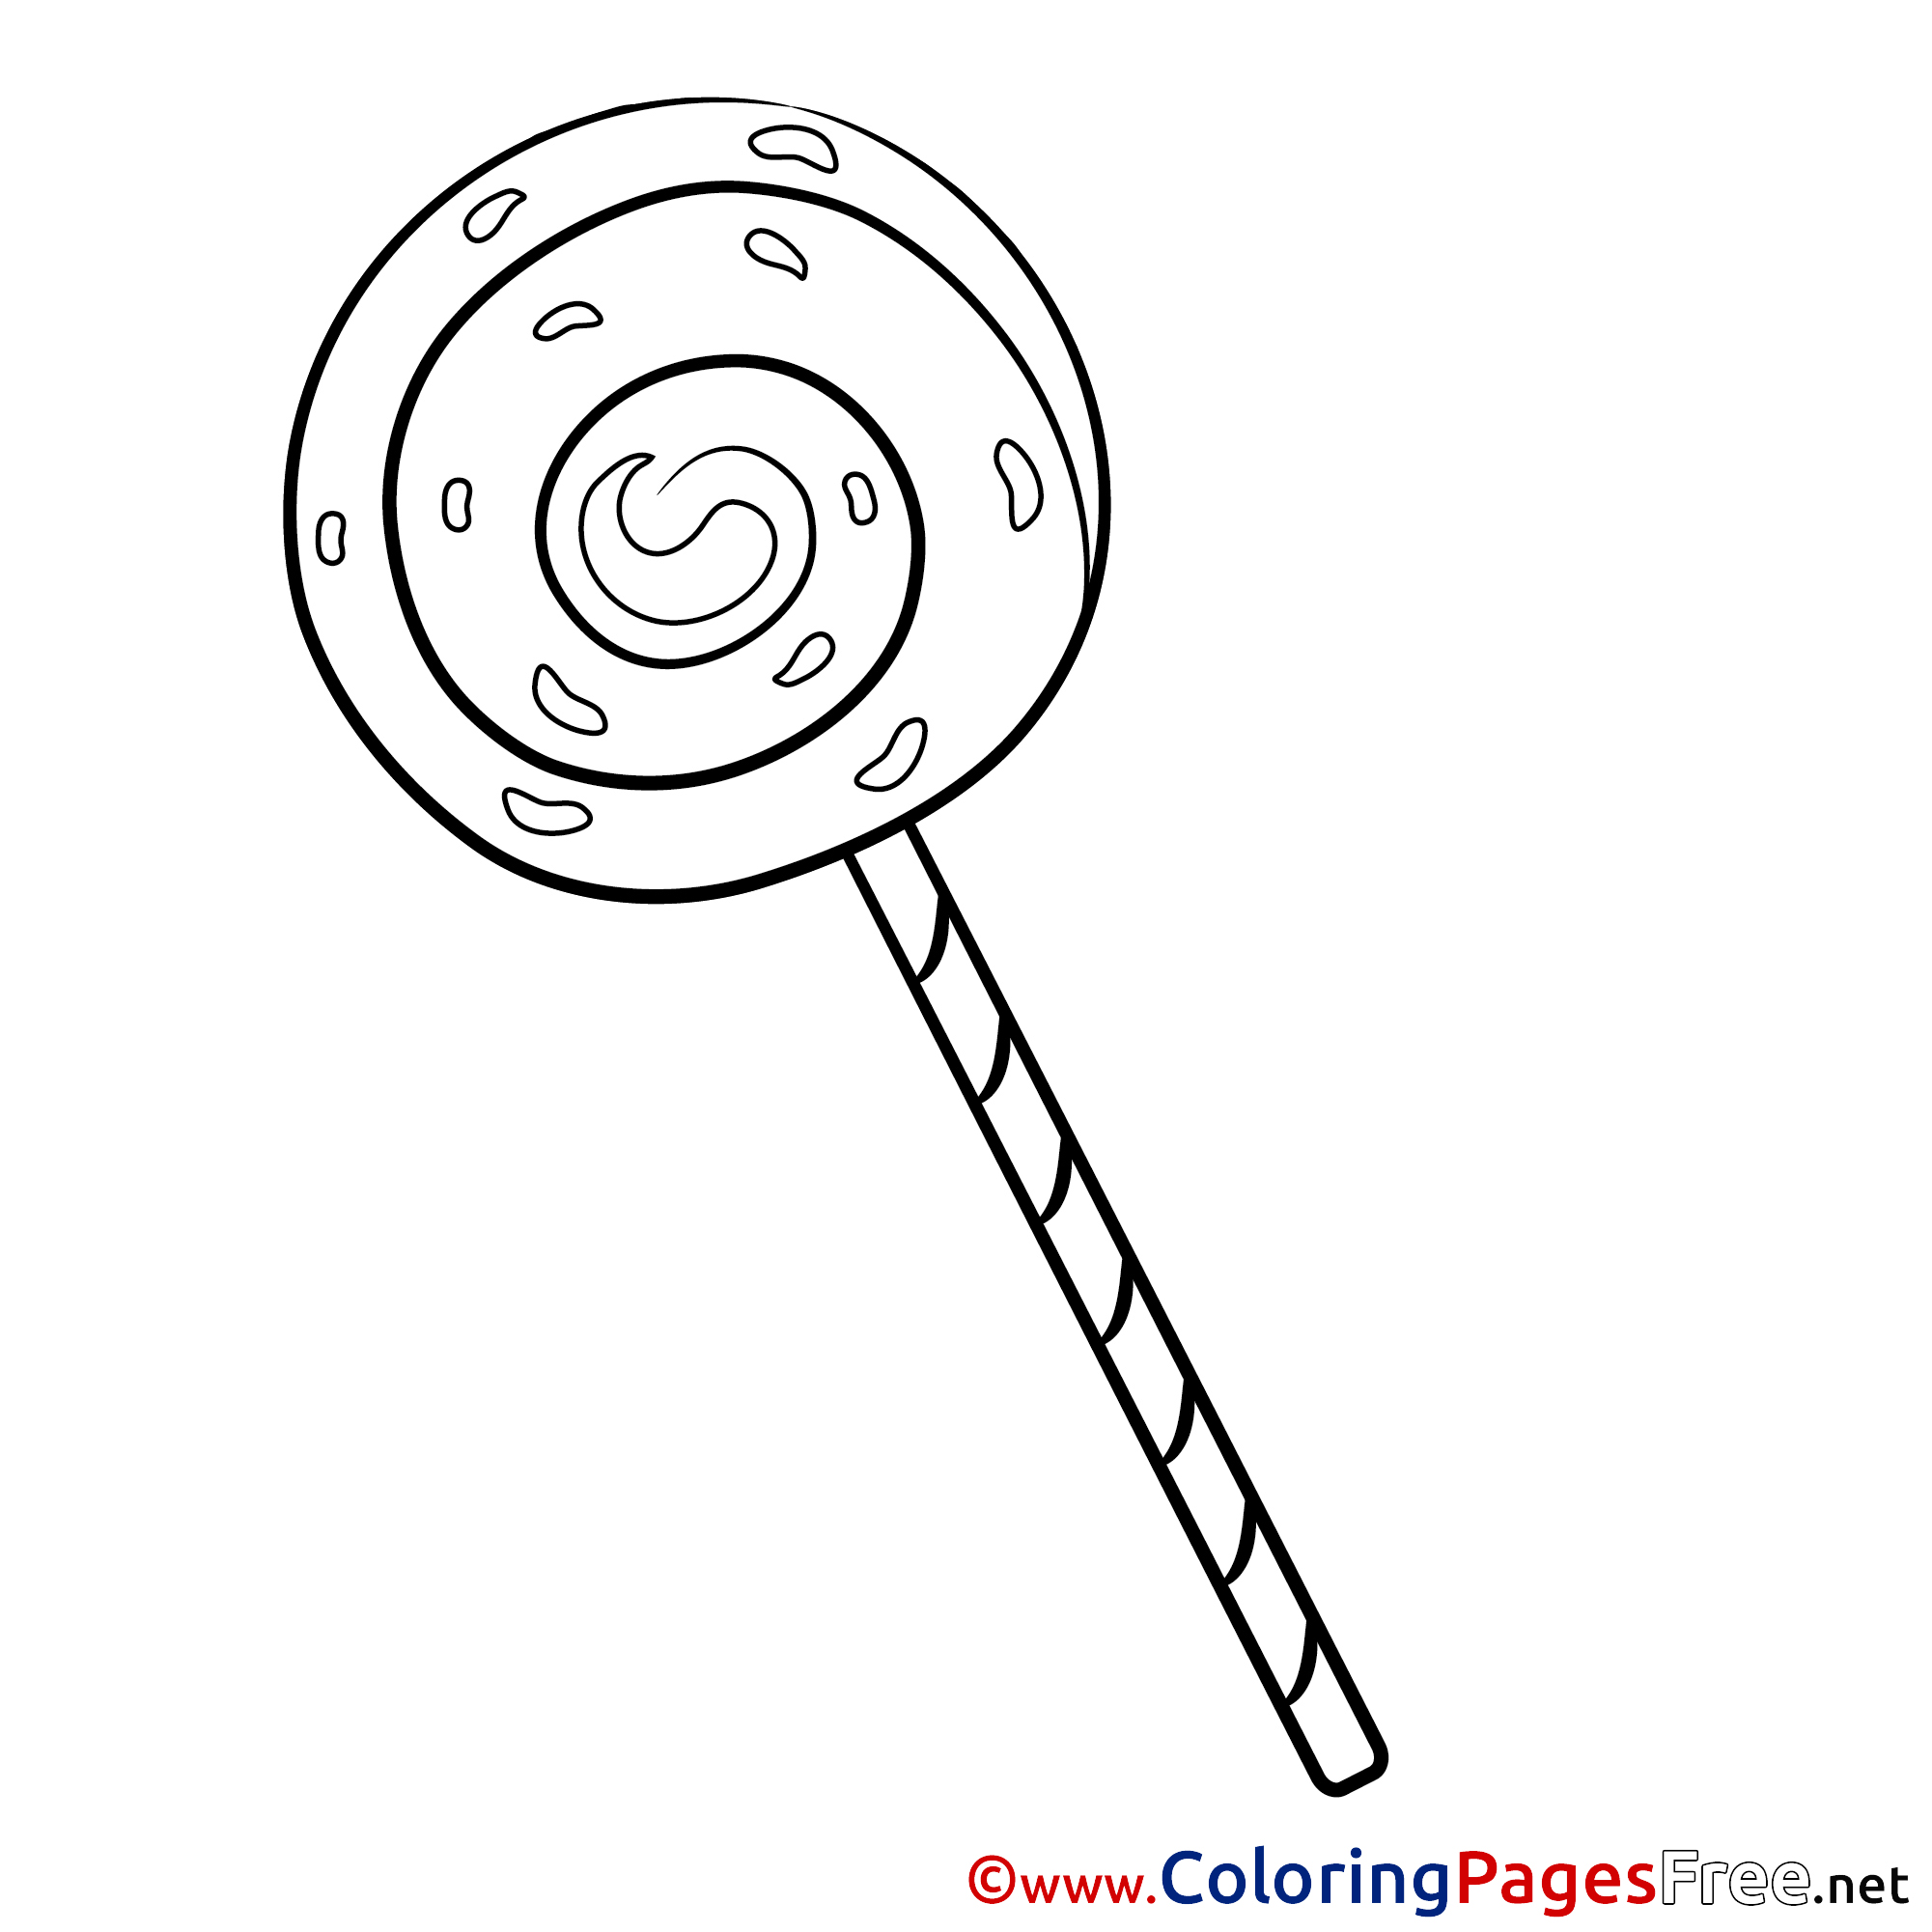 Lollipop for Kids printable Colouring Page